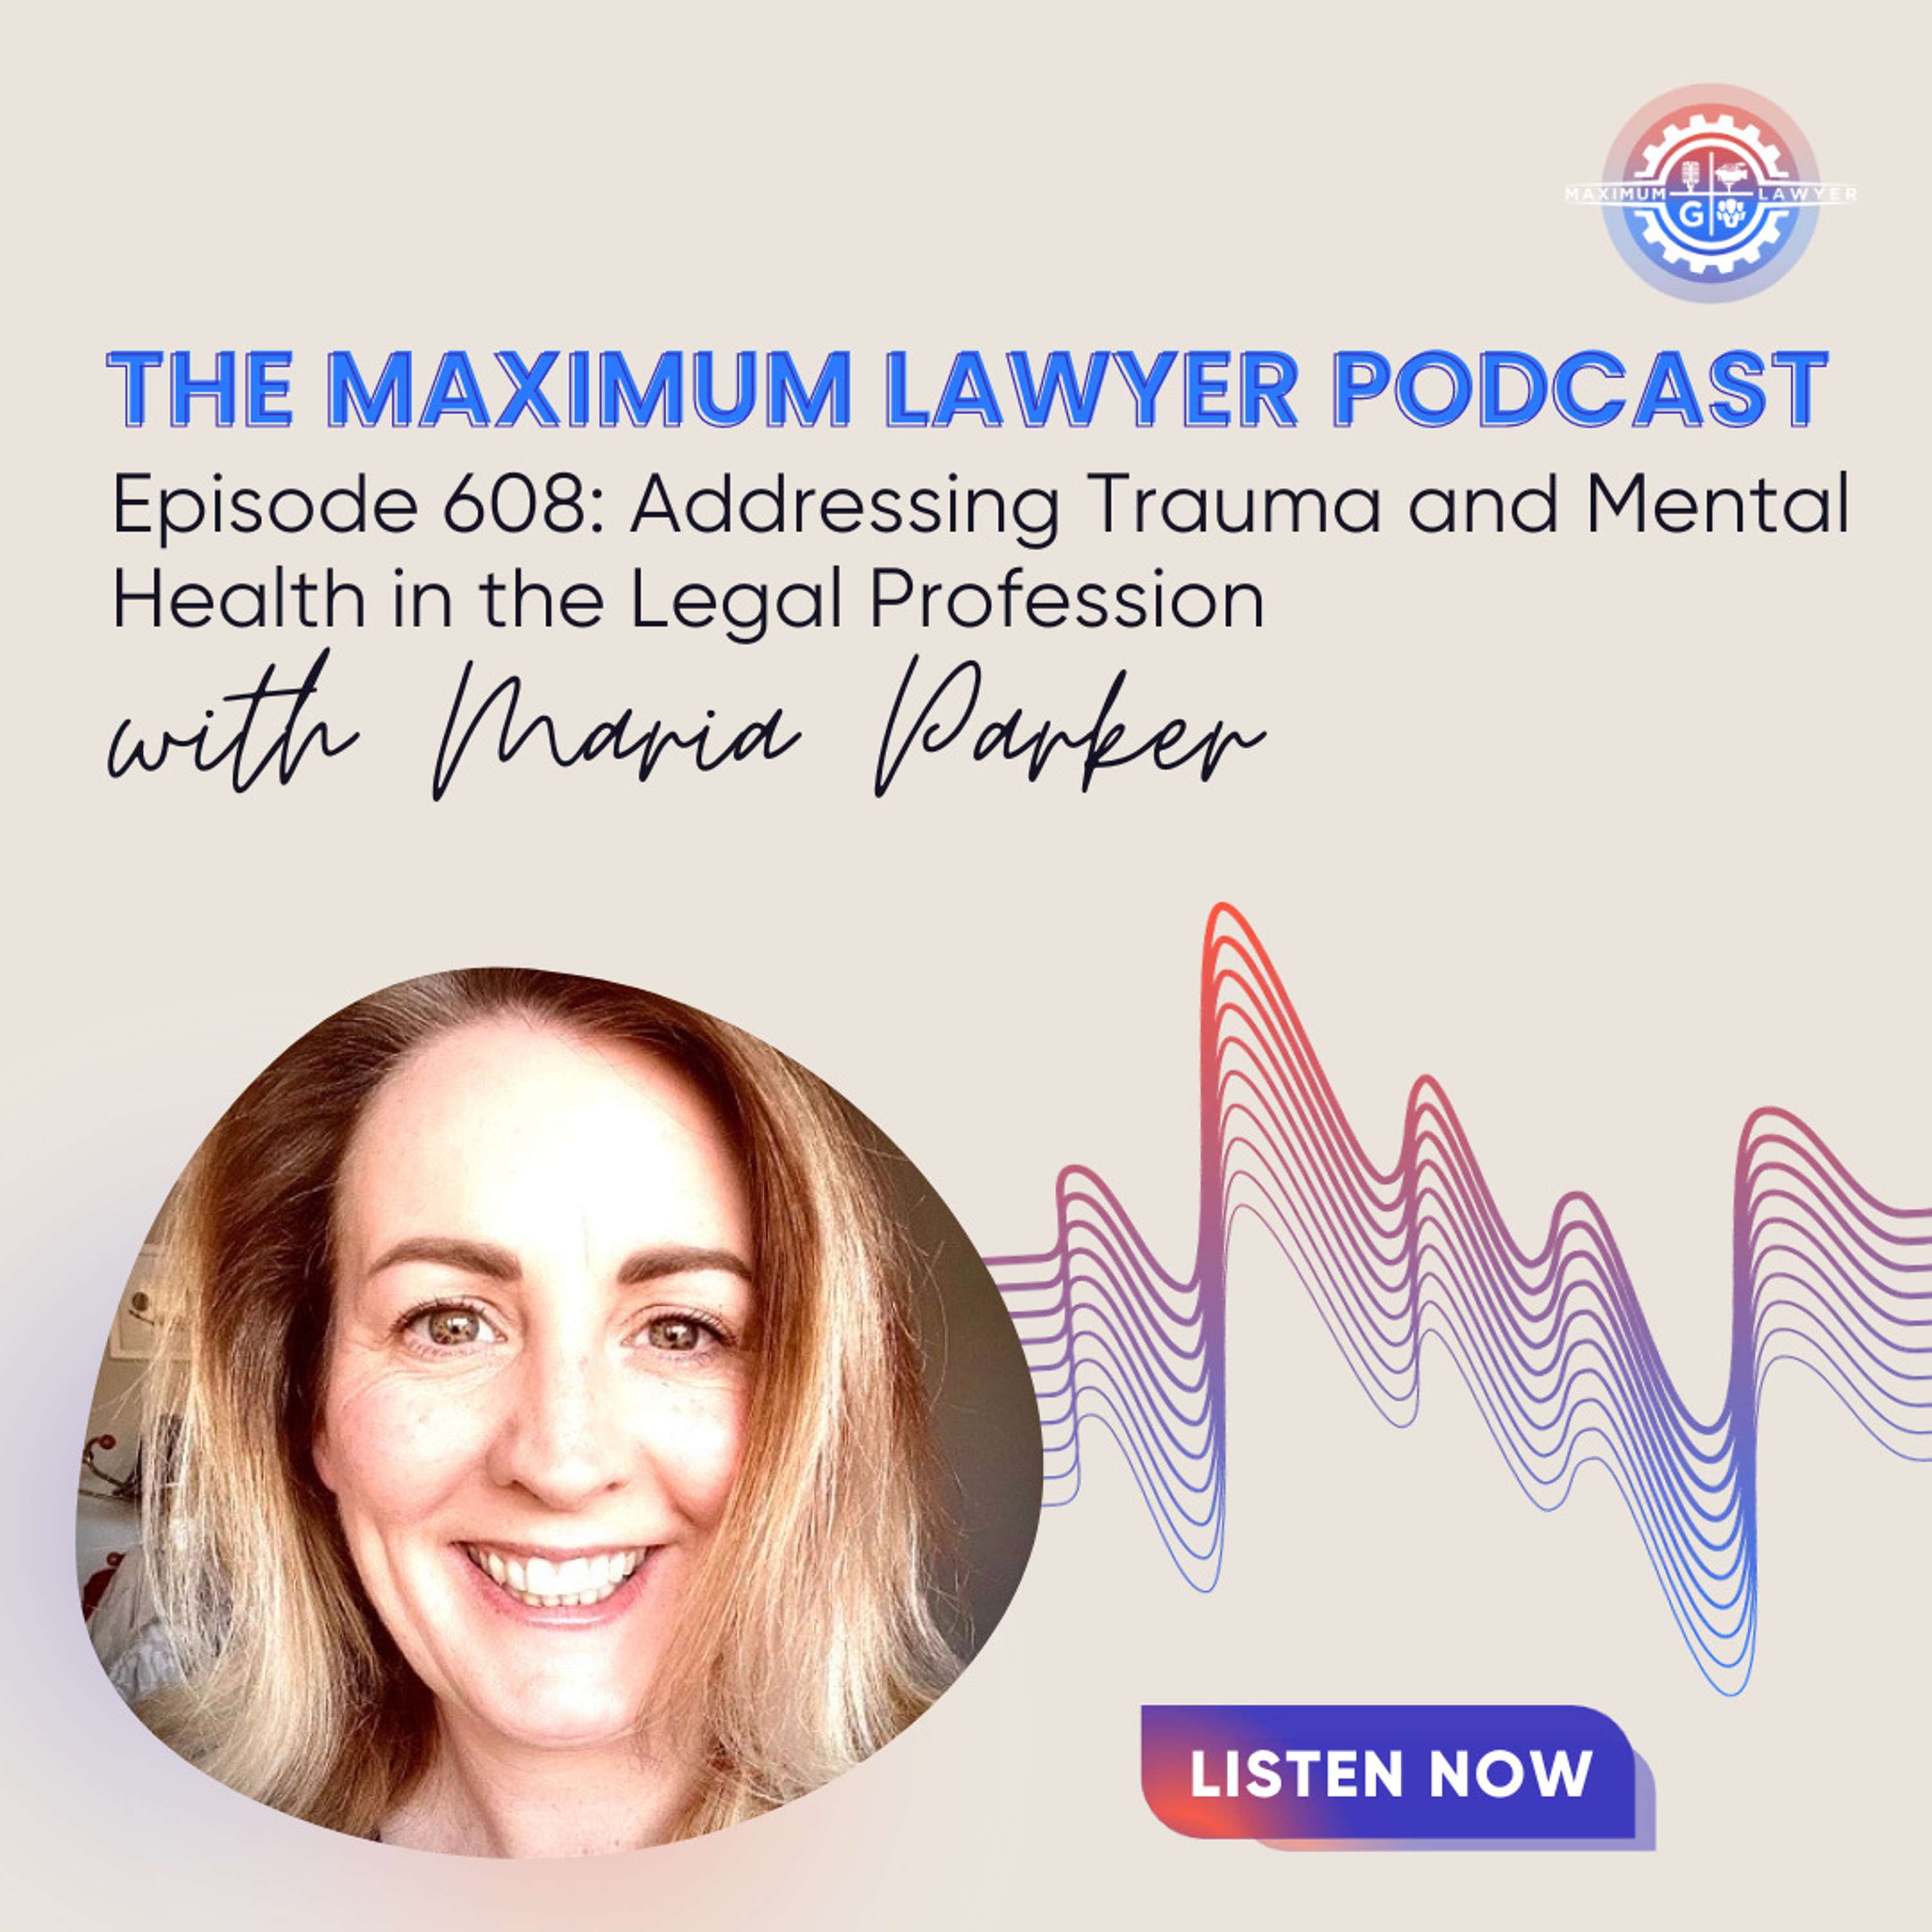 Addressing Trauma and Mental Health in the Legal Profession with Maria Parker